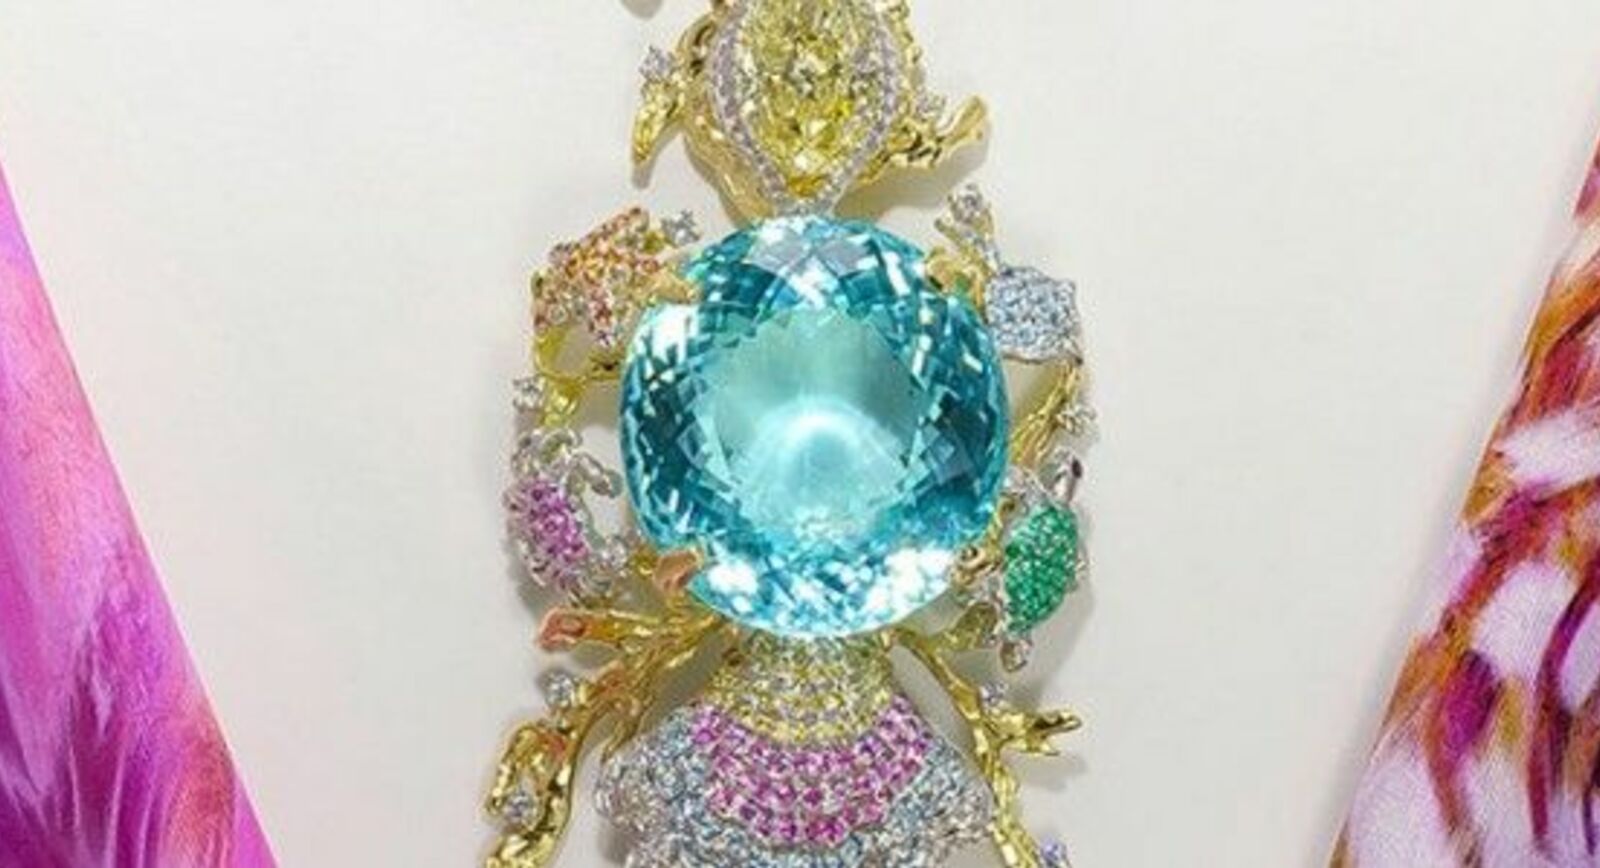 The Ethereal Carolina Divine Paraiba – A Famous Gem In The Guinness Book - DSF Antique Jewelry